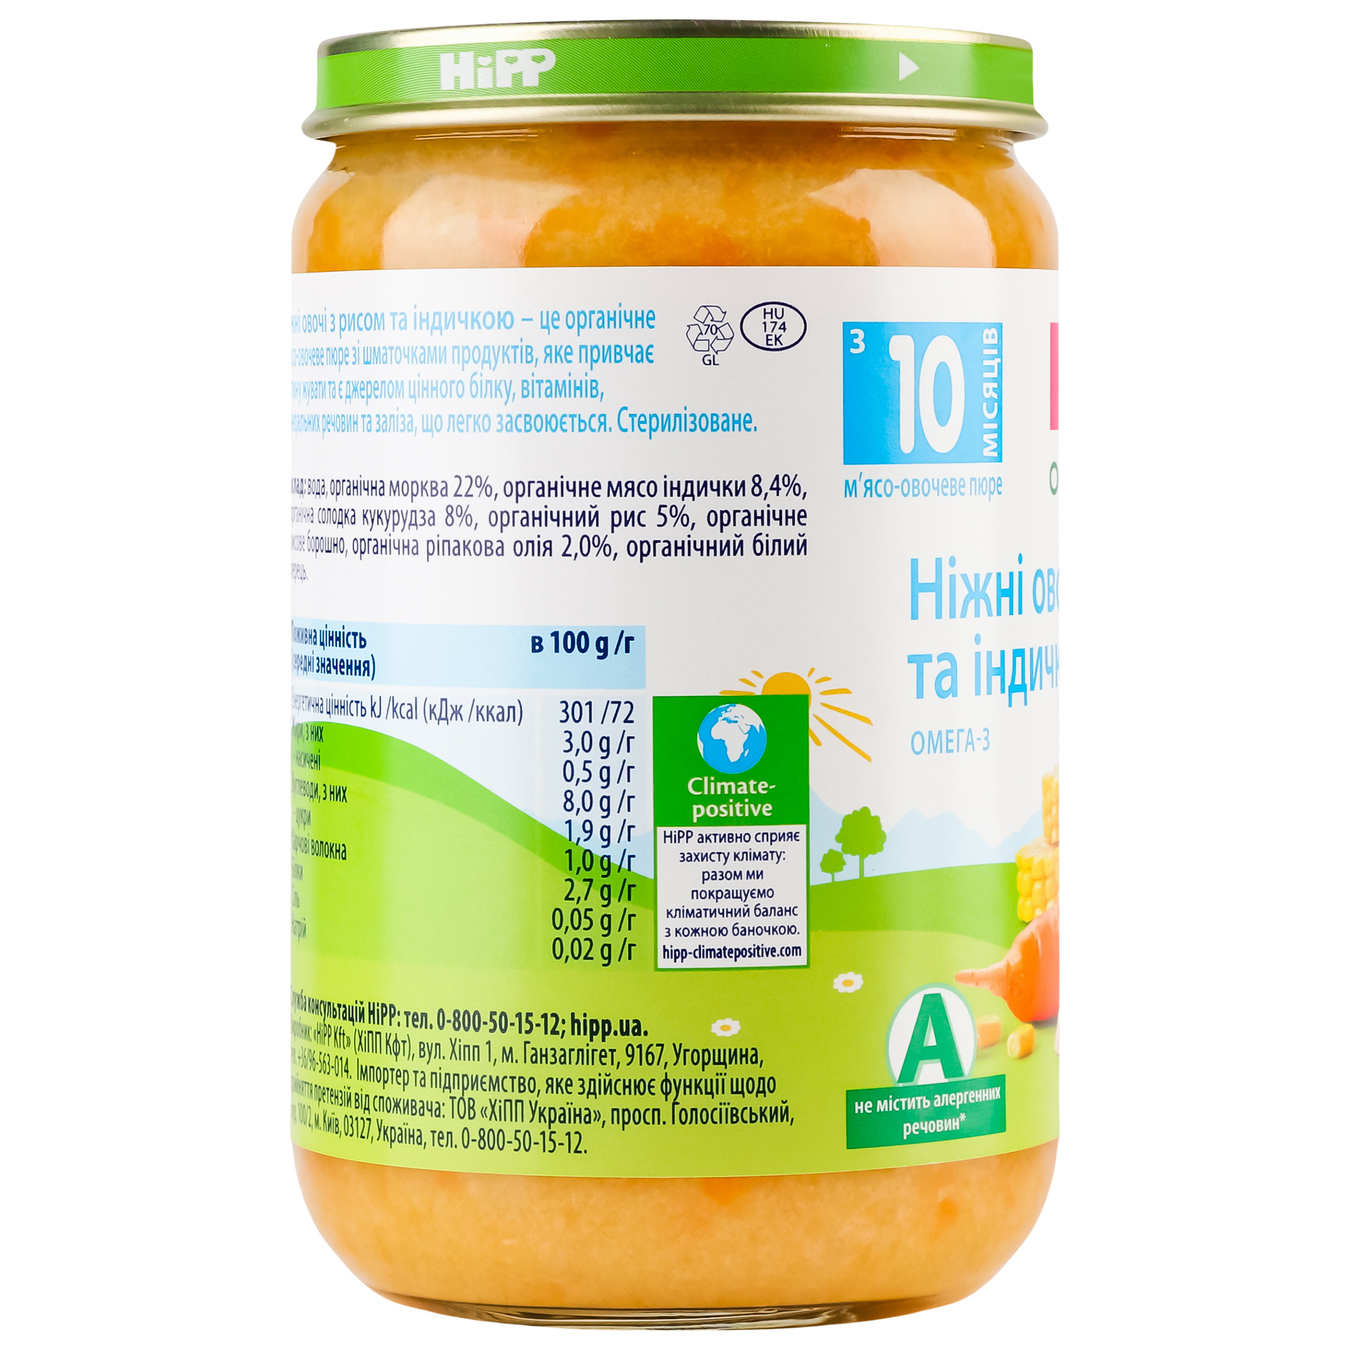 Baby puree HiPP Turkey in vegetables with rice for 12+ month old babies glass jar 220g Hungary 4